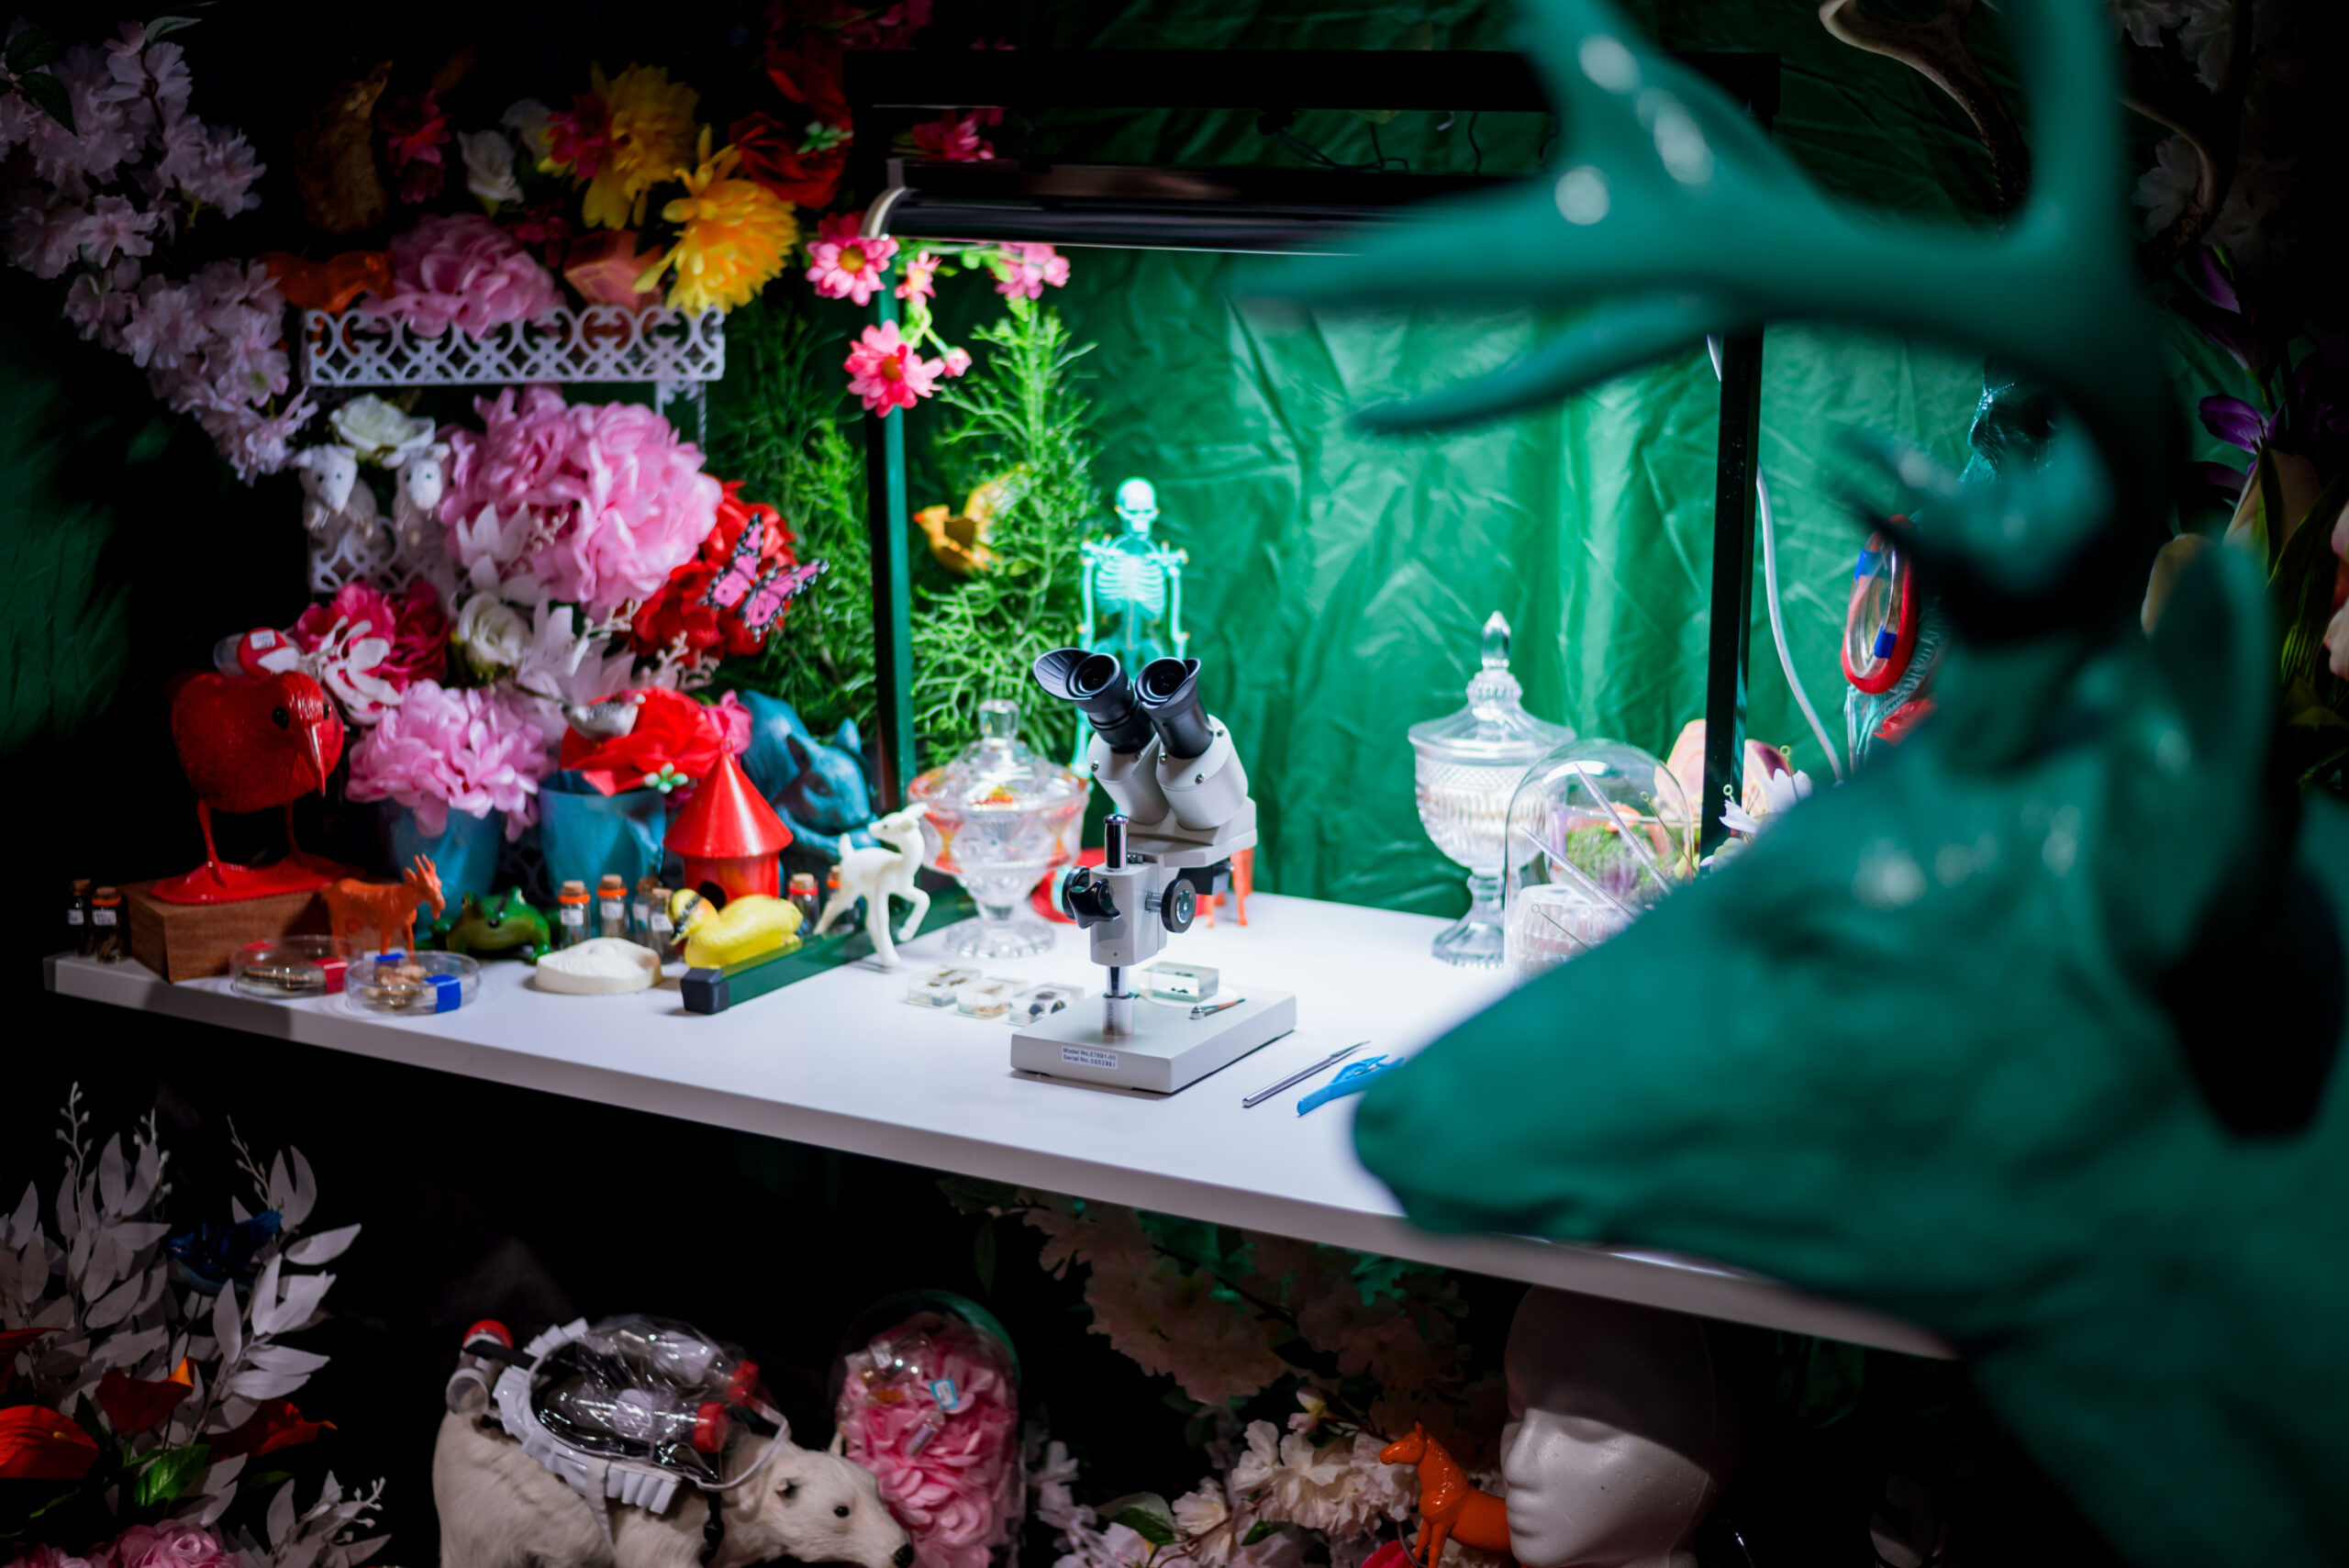 An art installation in a dark art gallery. A table is surrounded by artificial flowers, small plastic birds and animals, dishes, lab materials, and a microscope. In the foreground of the image is the head of a life-sized plastic deer painted turquoise.